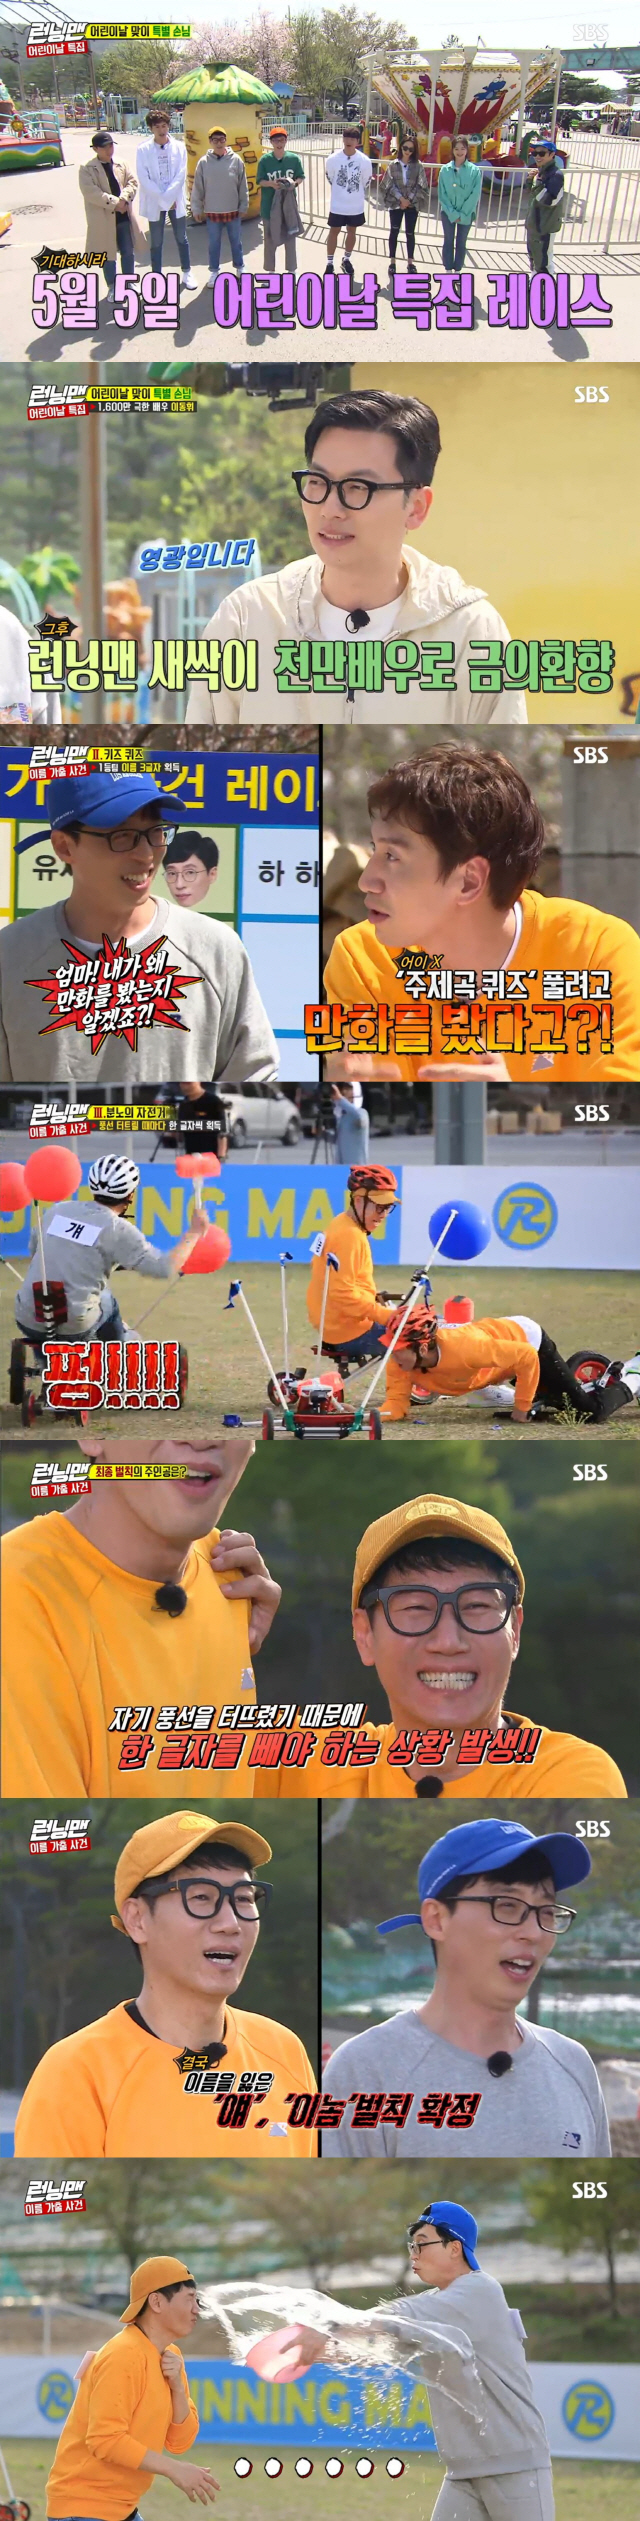 Yoo Jae-Suk and Ji Suk-jin became the main characters of the best one minute.On the same day, Running Man was decorated with the special Name Runaway Case Race on Childrens Day, and the members went to Game to regain the name tag with their name.Guests included Yi Dong-hwi, who was about to release the movie Little Client. Father Avengers Ji Suk-jin, Yoo Jae-Suk, and Haha became team leaders.The Ji Suk-jin team was teamed by Lee Kwang-soo and Song Ji-hyoga, the Yoo Jae-Suk team was teamed by Yi Dong-hwi and Yang Se-chan, and the Haha team was teamed by Jeon So-min and Kim Jong-kook.Since then, a full-scale race has begun.The first game was an age of memories that the first team could acquire four letters of name, and the second was a Kids Quiz, where the first team could acquire three letters of name.The last mission is a tump-bump bike that can be found as much as necessary. Each time you ride a bicycle and burst the balloon of your opponent, you get one letter.In the first half, the ace Kim Jong-kooks performance led to the victory of the small teams (Kim Jong-kook, Haha and Jeon So-min) and the remaining two teams in the second half.Lee Kwang-soos baby tricycle failed to beat the weight and broke two dongs, and the same team Yi Dong-hwi was in crisis because only one remaining balloon remained.Eventually, the race ended with Yang Se-chan bursting Lee Kwang-soos remaining balloon.As Yoo Jae-Suk found Seok, Ji Suk-jin also found all the names, but Ji Suk-jin had to take one out at the end of his balloon.Lee Kwang-soo, who beat the scissors rock, took out the seat and Ji Suk-jin and Yoo Jae-Suk, who were not completed, were punished for the water.The scene recorded the highest audience rating of 6.4% per minute, accounting for the best one minute.